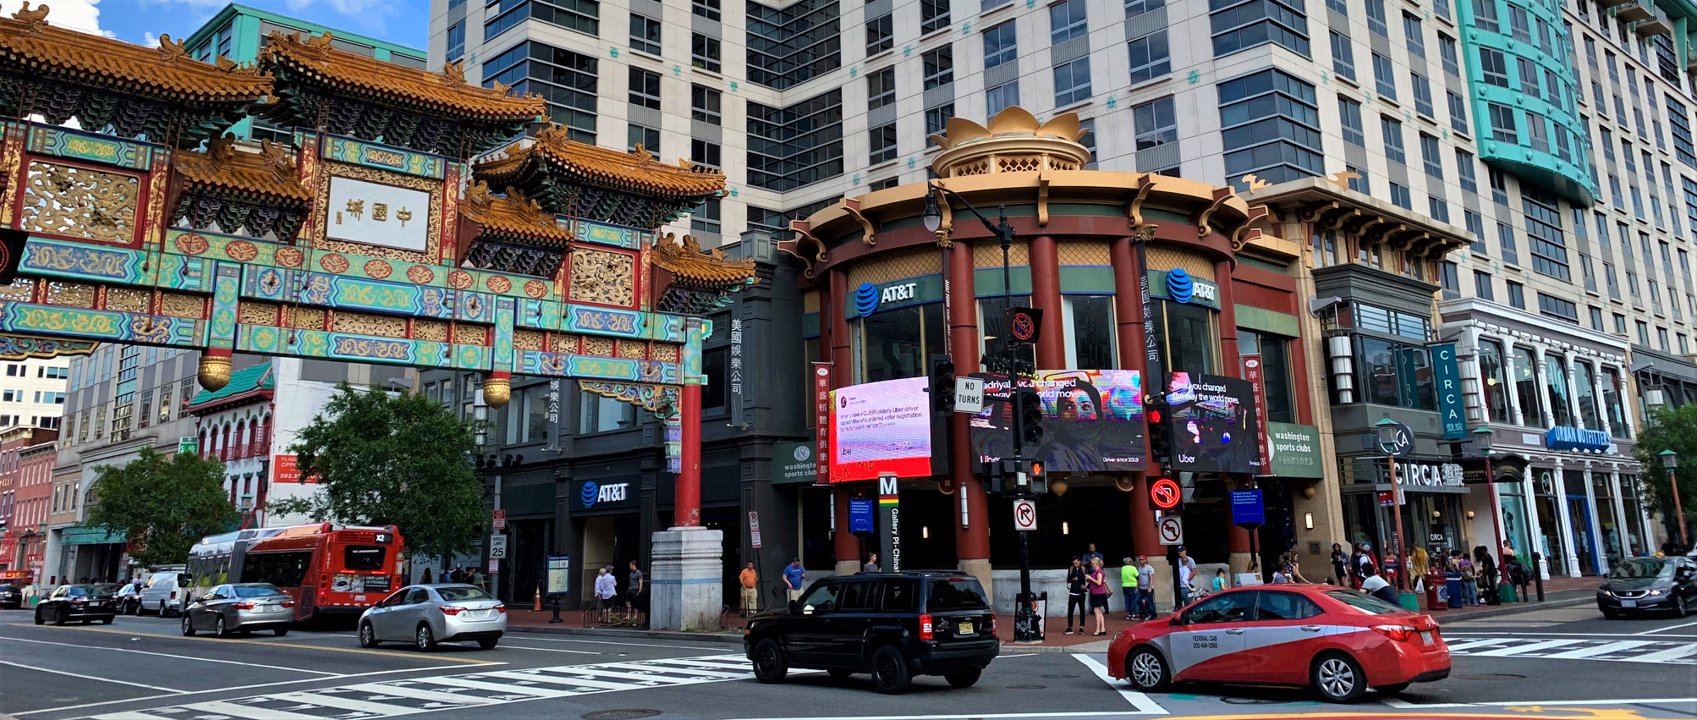 Homes For Sale Near Gallery Place - Chinatown Metro Station